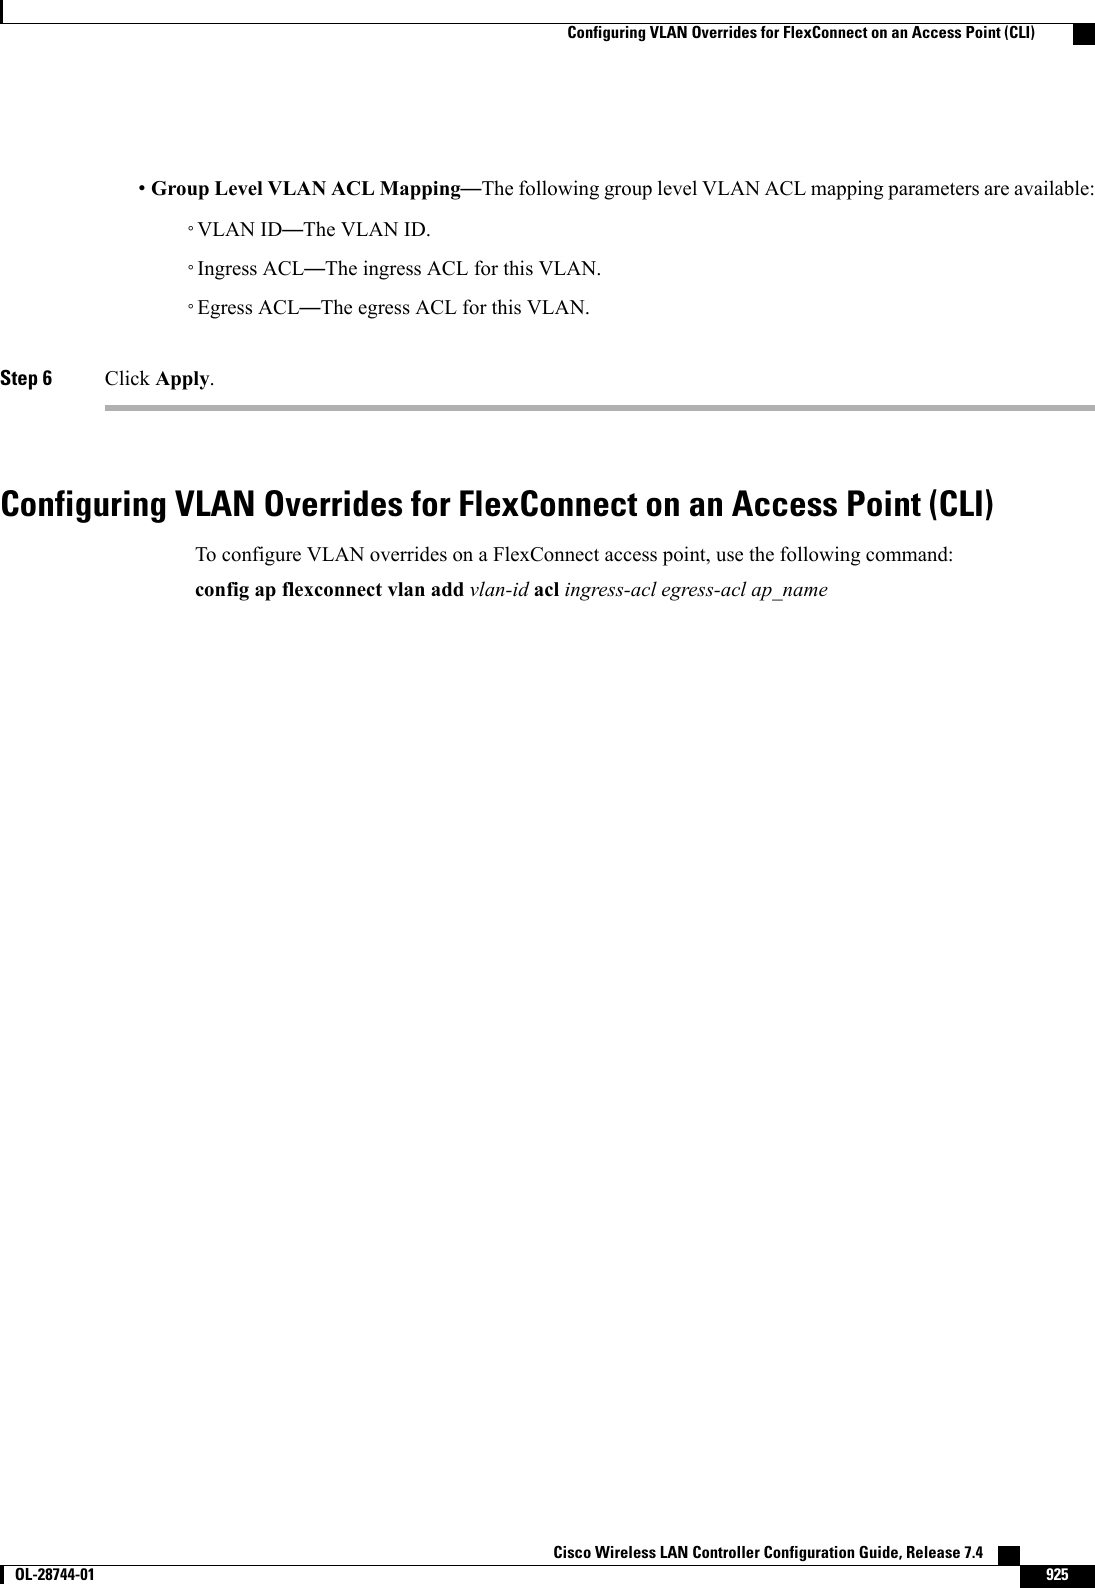 •Group Level VLAN ACL Mapping—The following group level VLAN ACL mapping parameters are available:◦VLAN ID—The VLAN ID.◦Ingress ACL—The ingress ACL for this VLAN.◦Egress ACL—The egress ACL for this VLAN.Step 6 Click Apply.Configuring VLAN Overrides for FlexConnect on an Access Point (CLI)To configure VLAN overrides on a FlexConnect access point, use the following command:config ap flexconnect vlan add vlan-id acl ingress-acl egress-acl ap_nameCisco Wireless LAN Controller Configuration Guide, Release 7.4       OL-28744-01 925Configuring VLAN Overrides for FlexConnect on an Access Point (CLI)